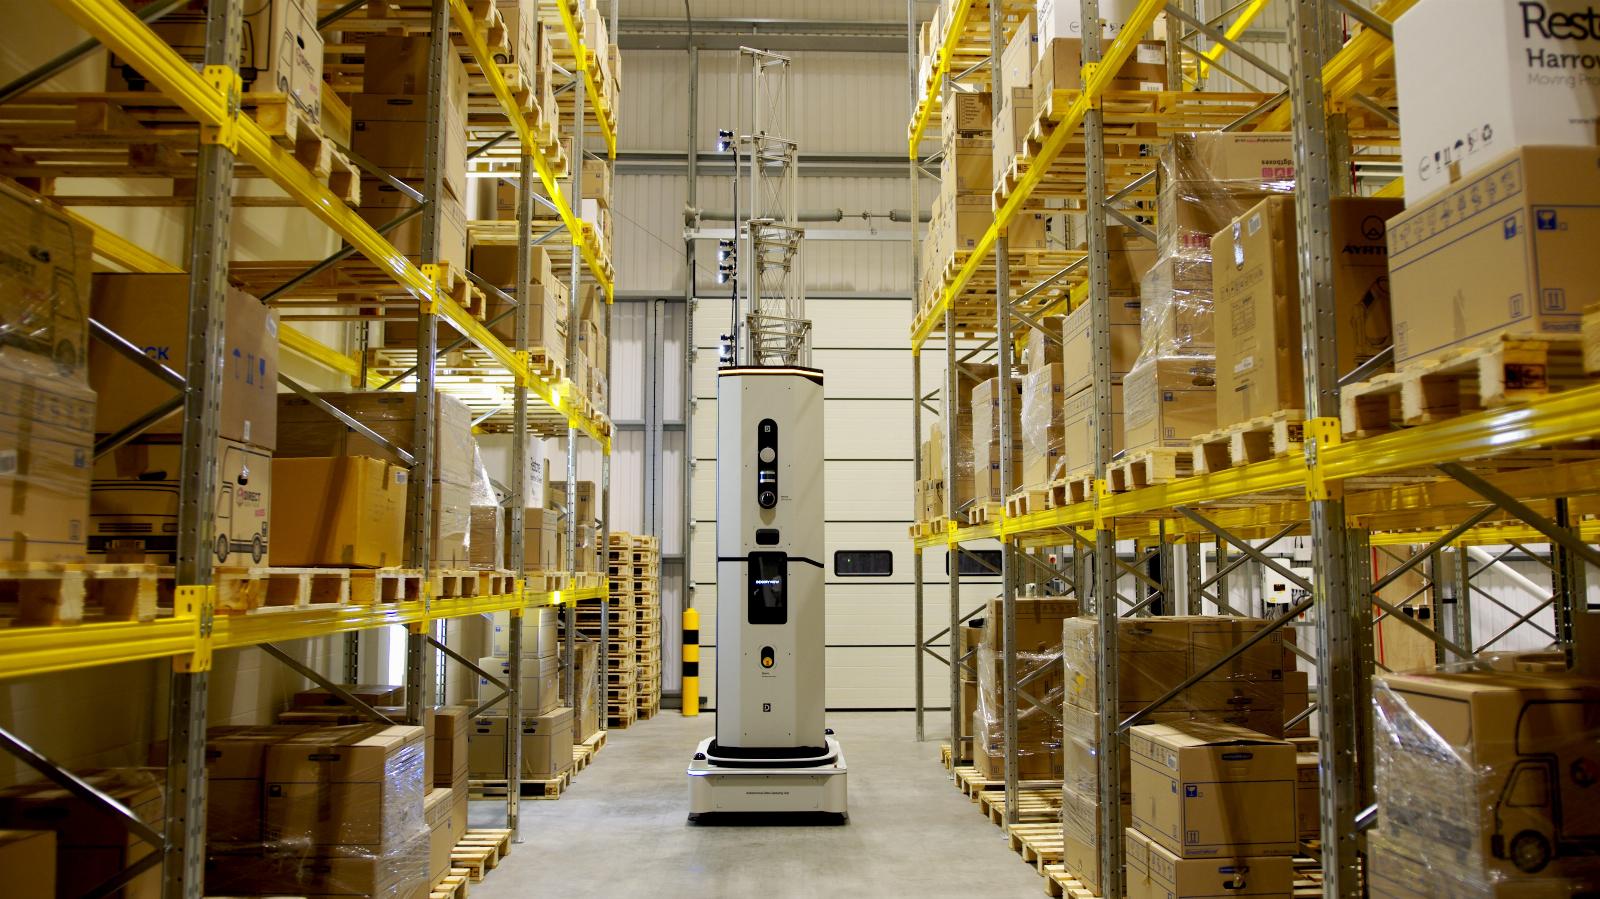 Dexory nabs $19M to bring visibility to warehouses through analytics and autonomous robots